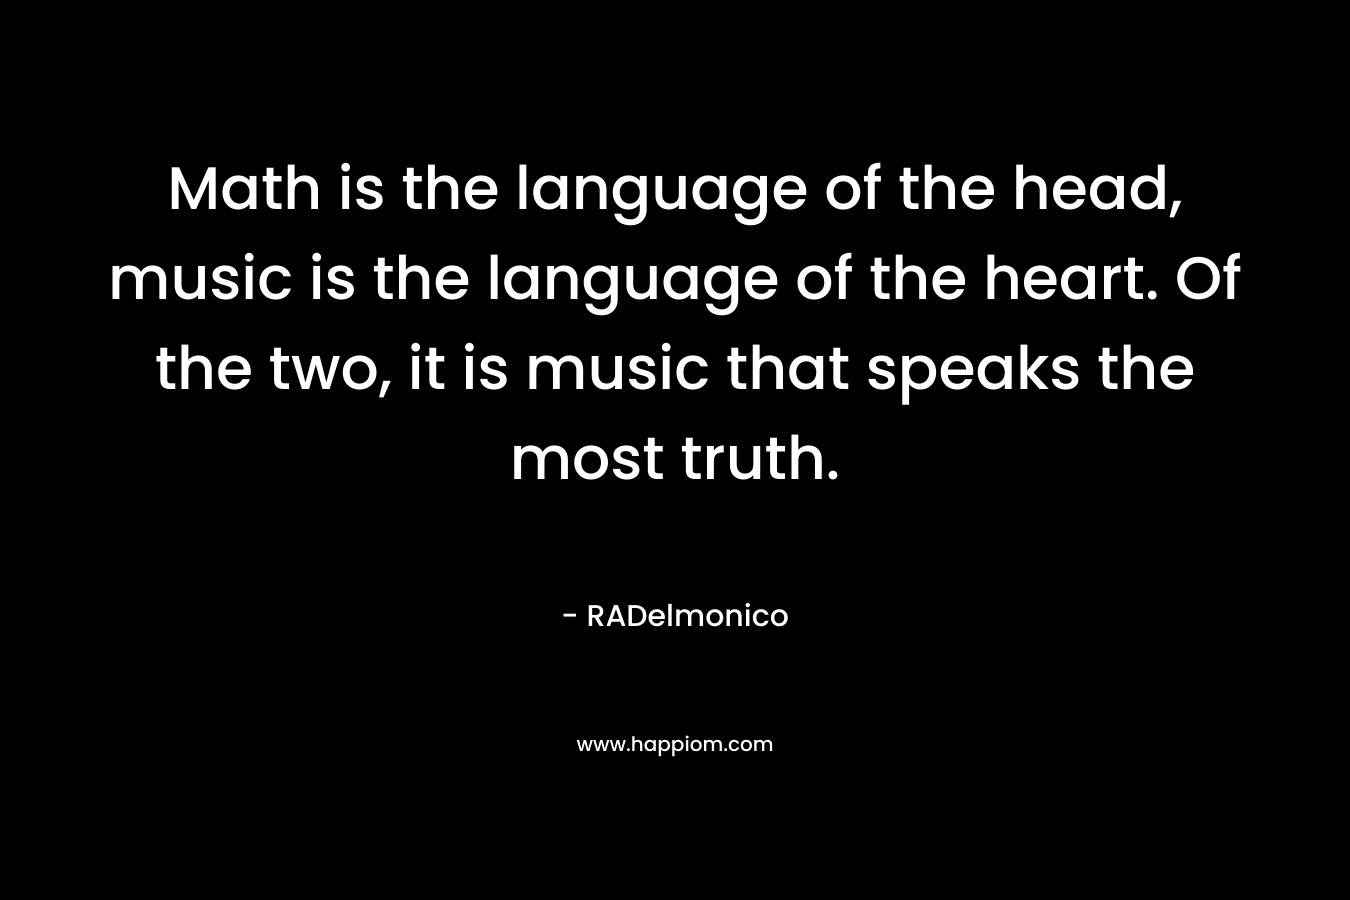 Math is the language of the head, music is the language of the heart. Of the two, it is music that speaks the most truth.